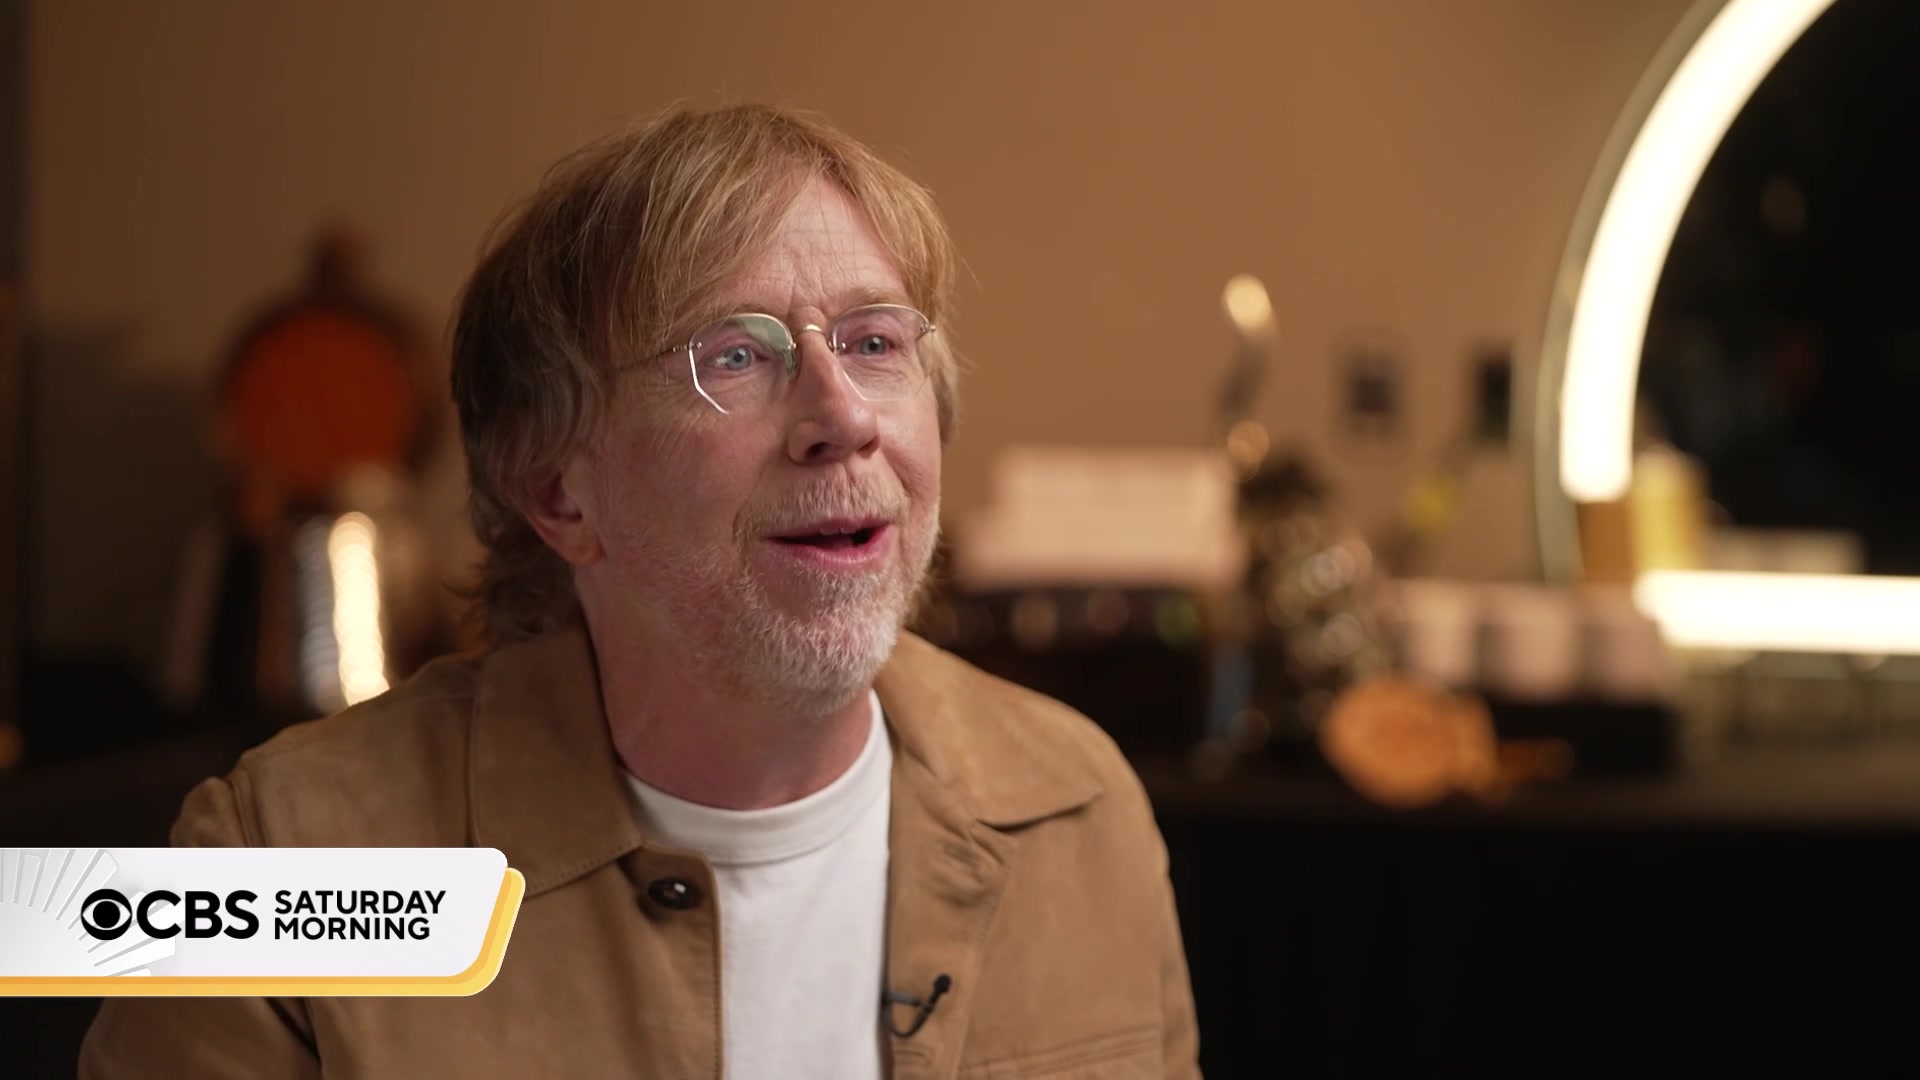 “We have the smartest, most informed audience, possibly, of any band.” Phish frontman Trey Anastasio shares how the legendary jam band is honoring their devoted fans during their four sold-out shows at sphere. #phish #music #lasvegas #spherelasvegas